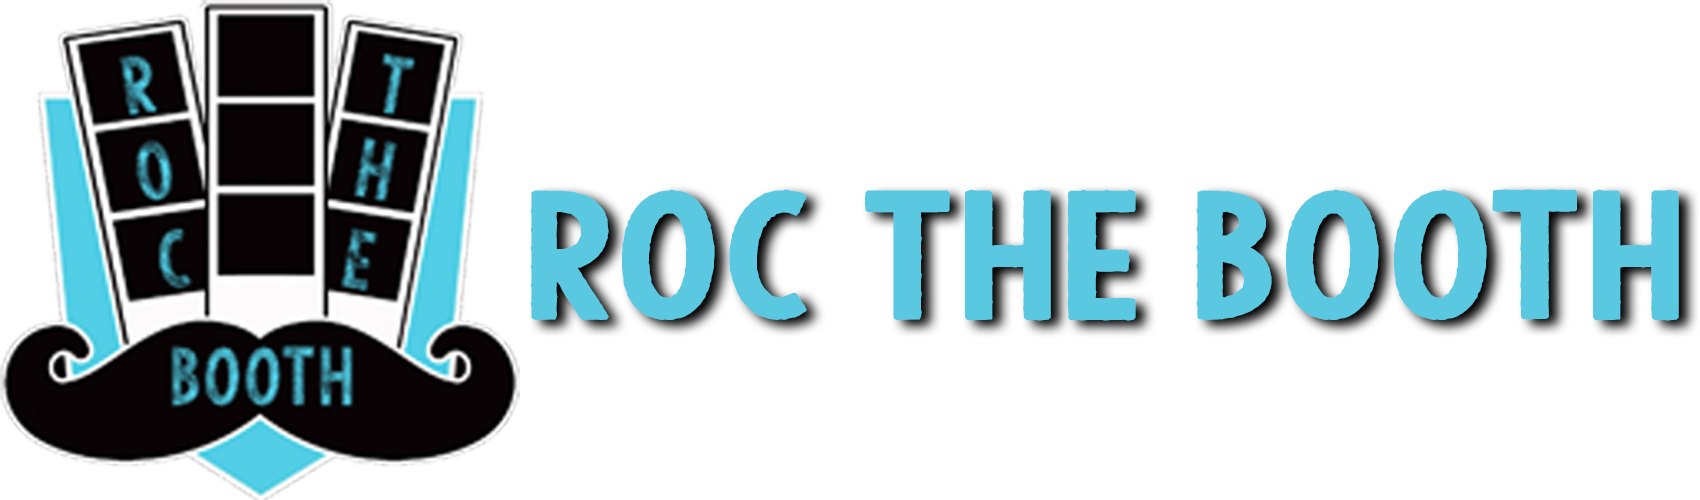 Roc The Booth Logo PNG image